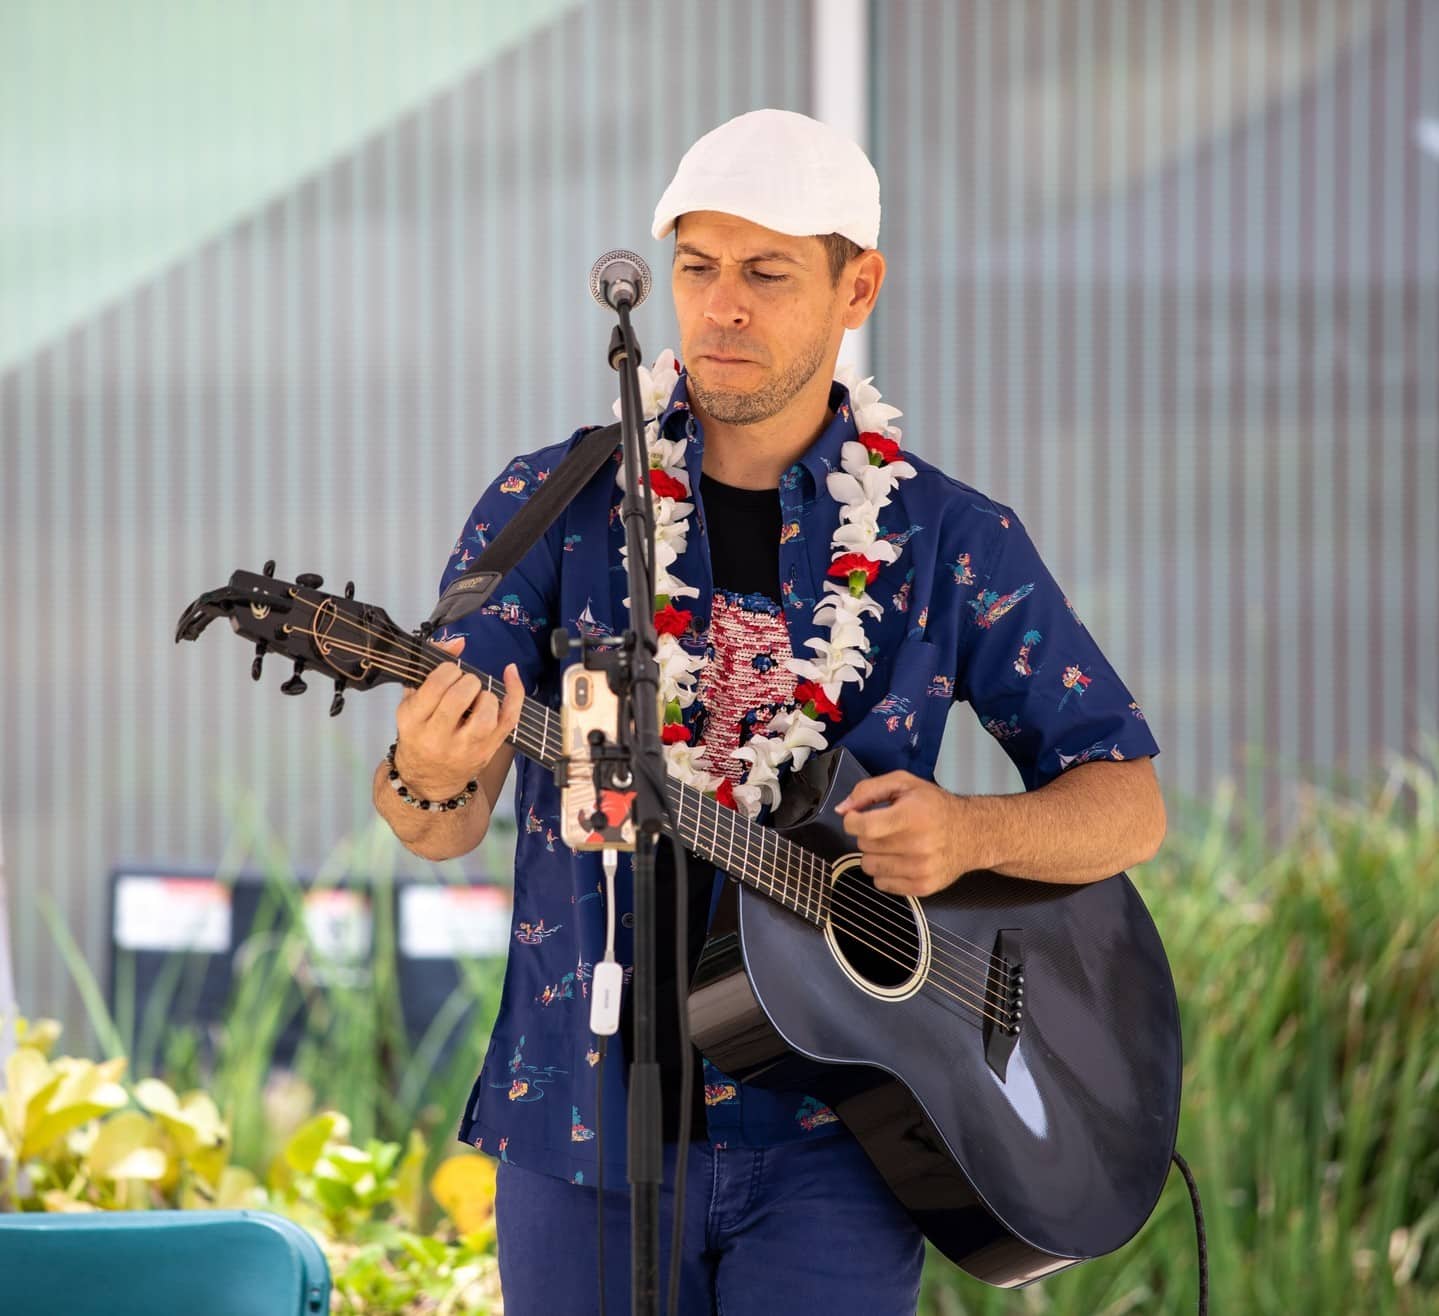 Aloha Friday Holiday Music Series returns with @kamuelamusic on Friday, December 23. Follow the sound to the South Shore Market courtyard from 12pm - 1pm!